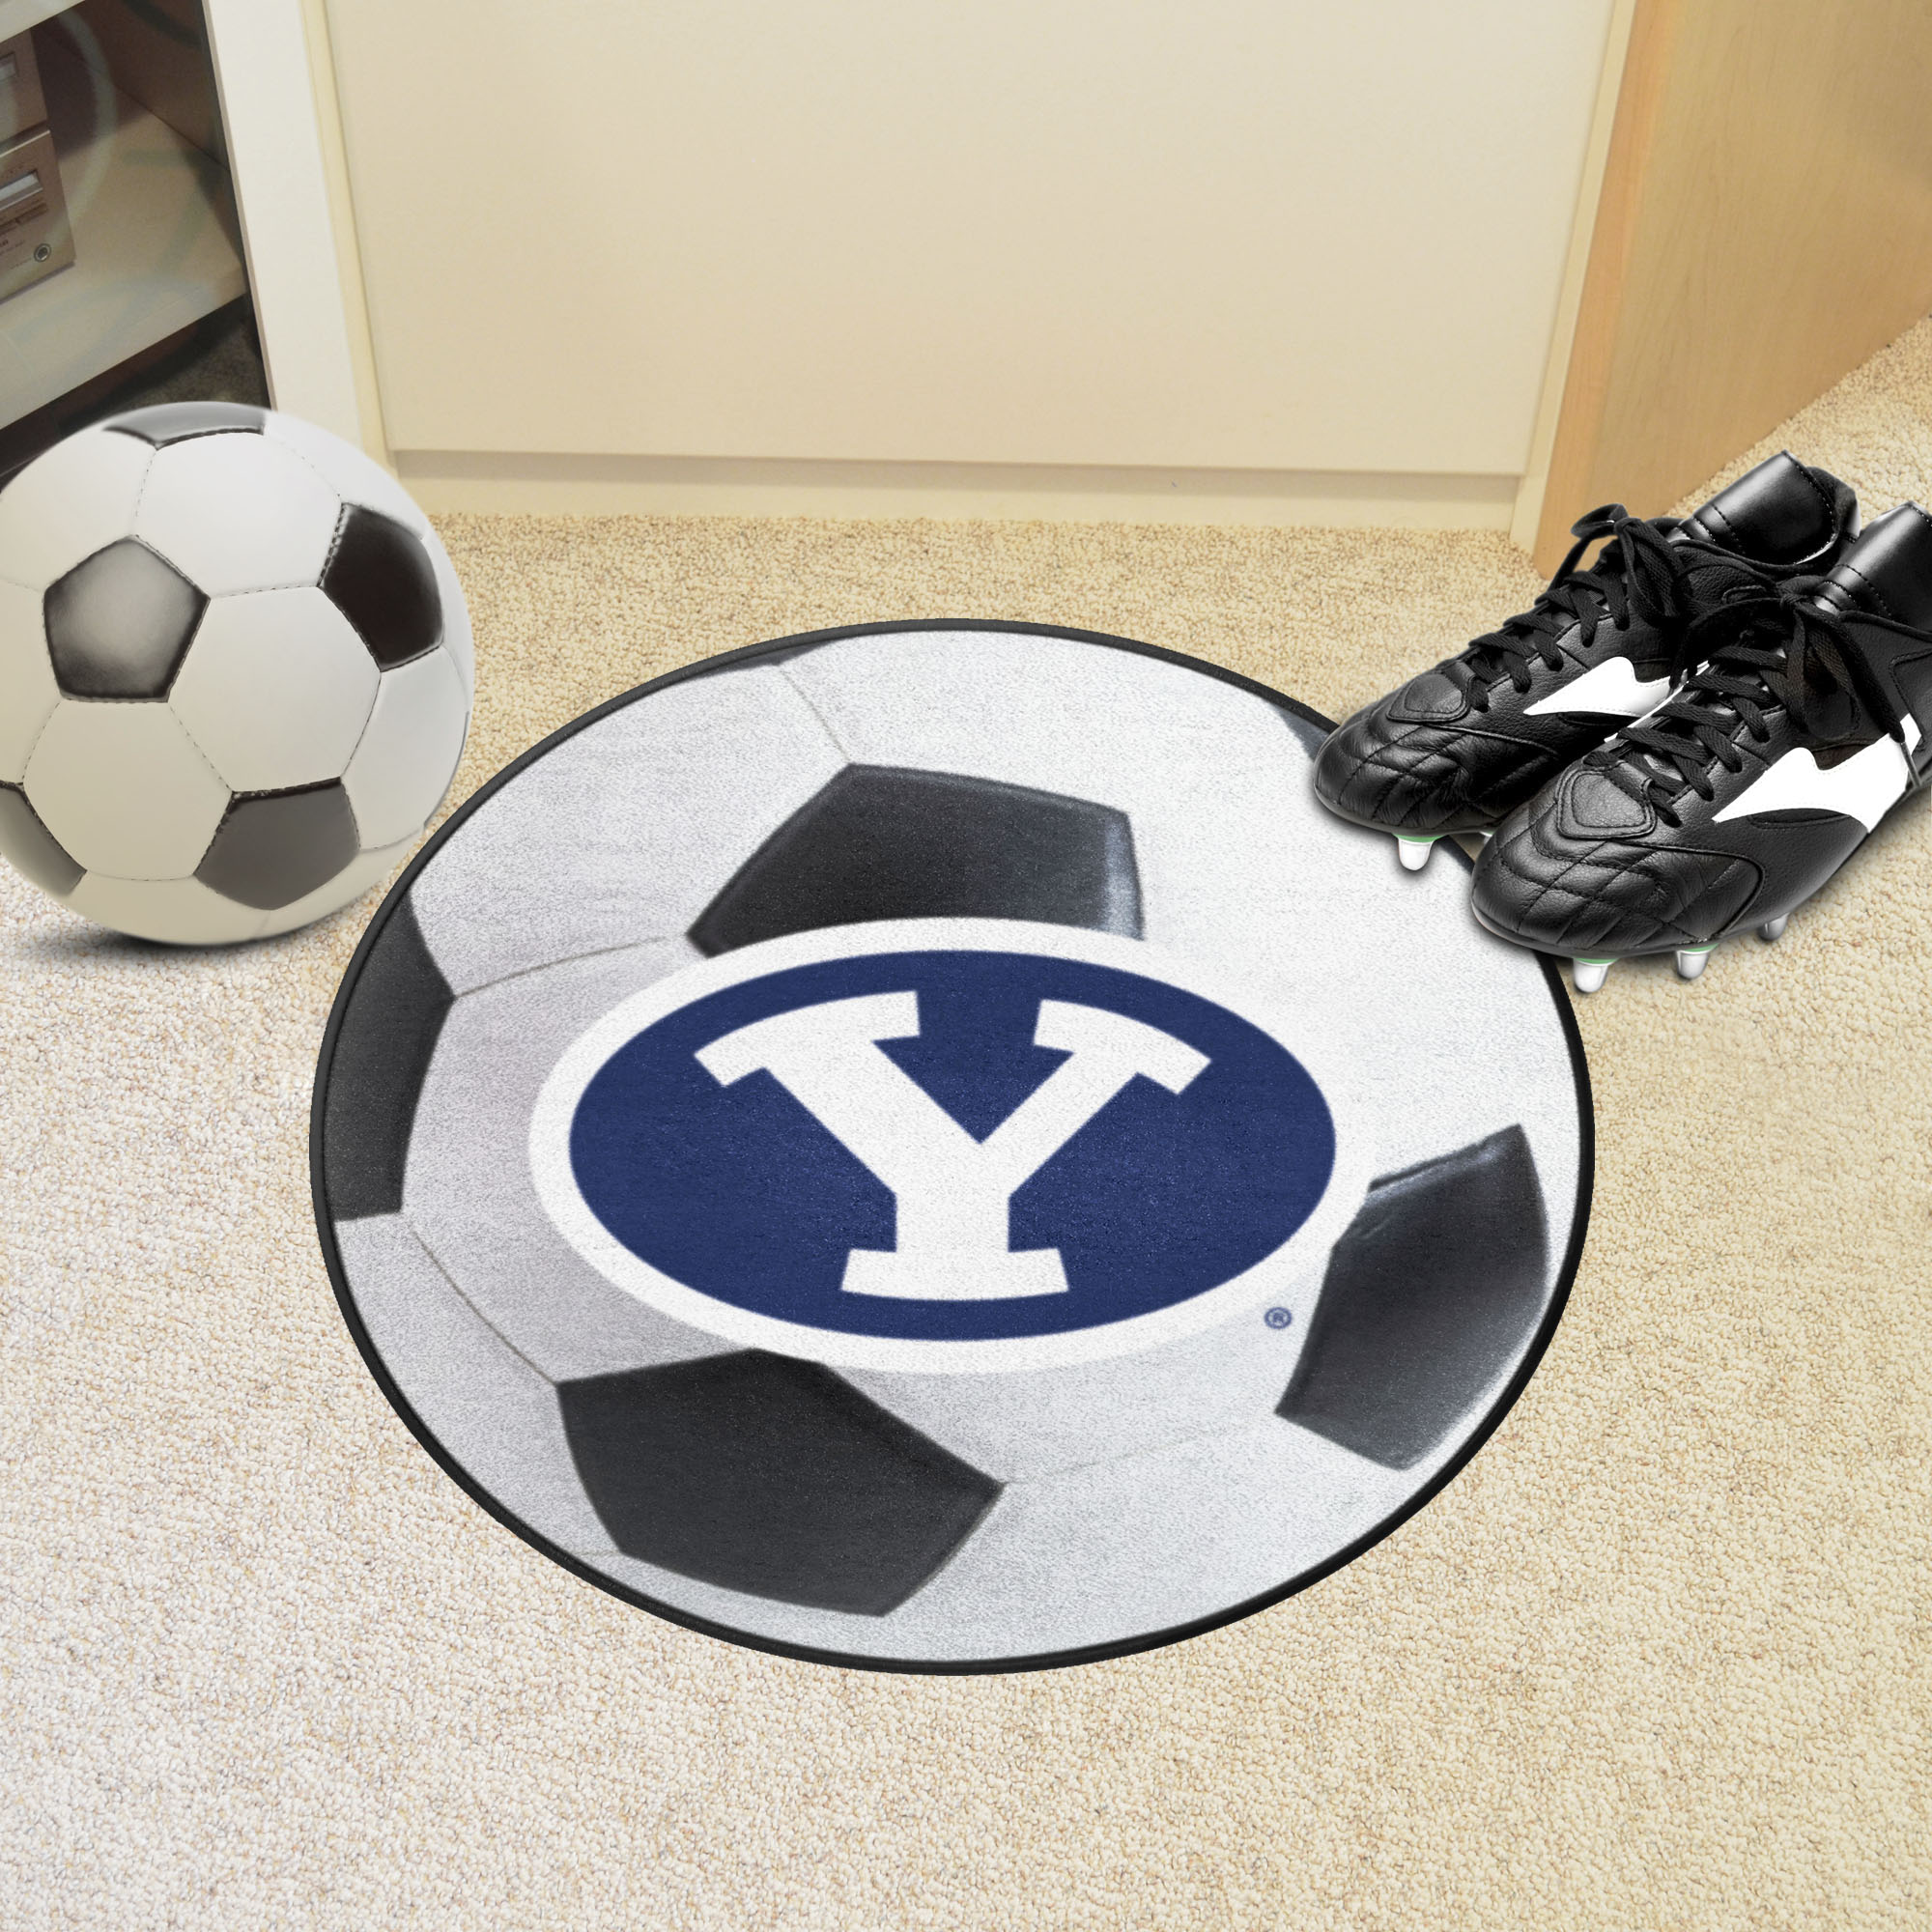 Brigham Young University Ball Shaped Area Rugs (Ball Shaped Area Rugs: Soccer Ball)